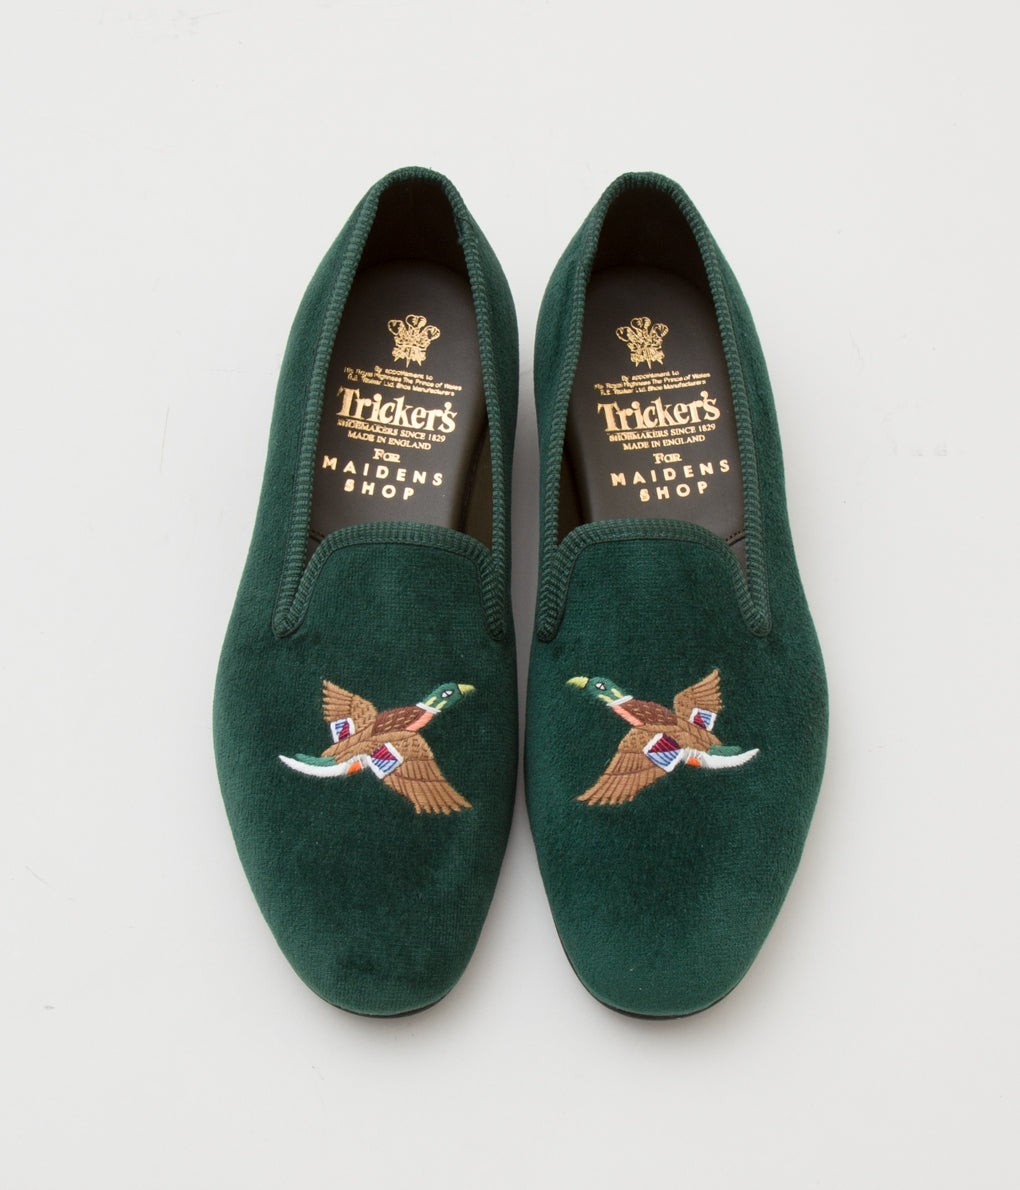 TRICKER'S FOR MAIDENS SHOP "CHURCHILL"(GREEN)